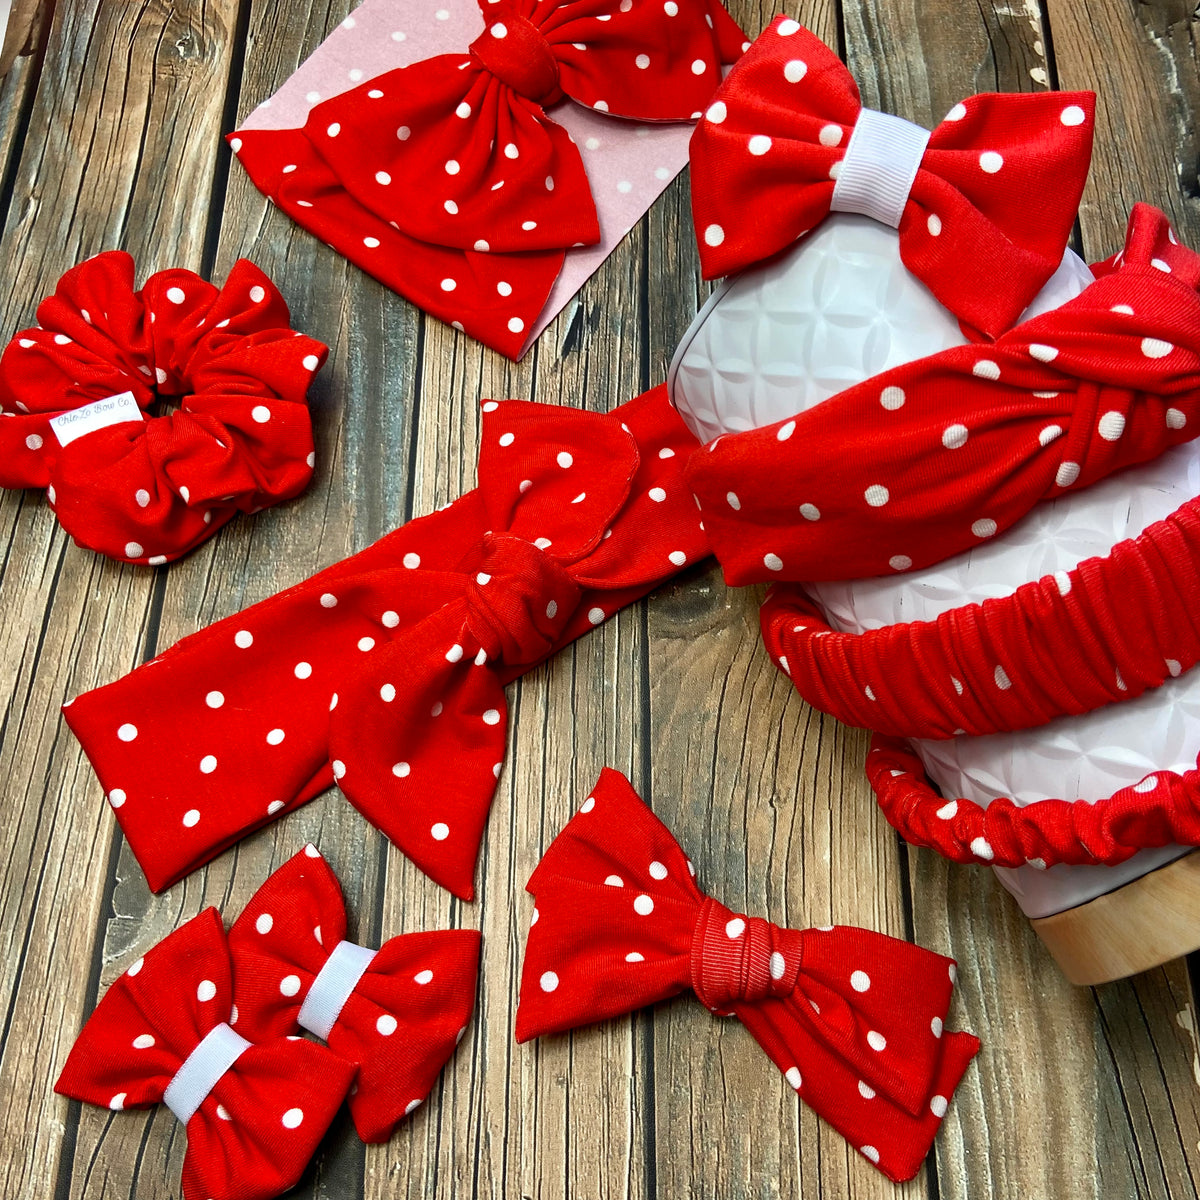 Red Polka Dot Structured Headbands